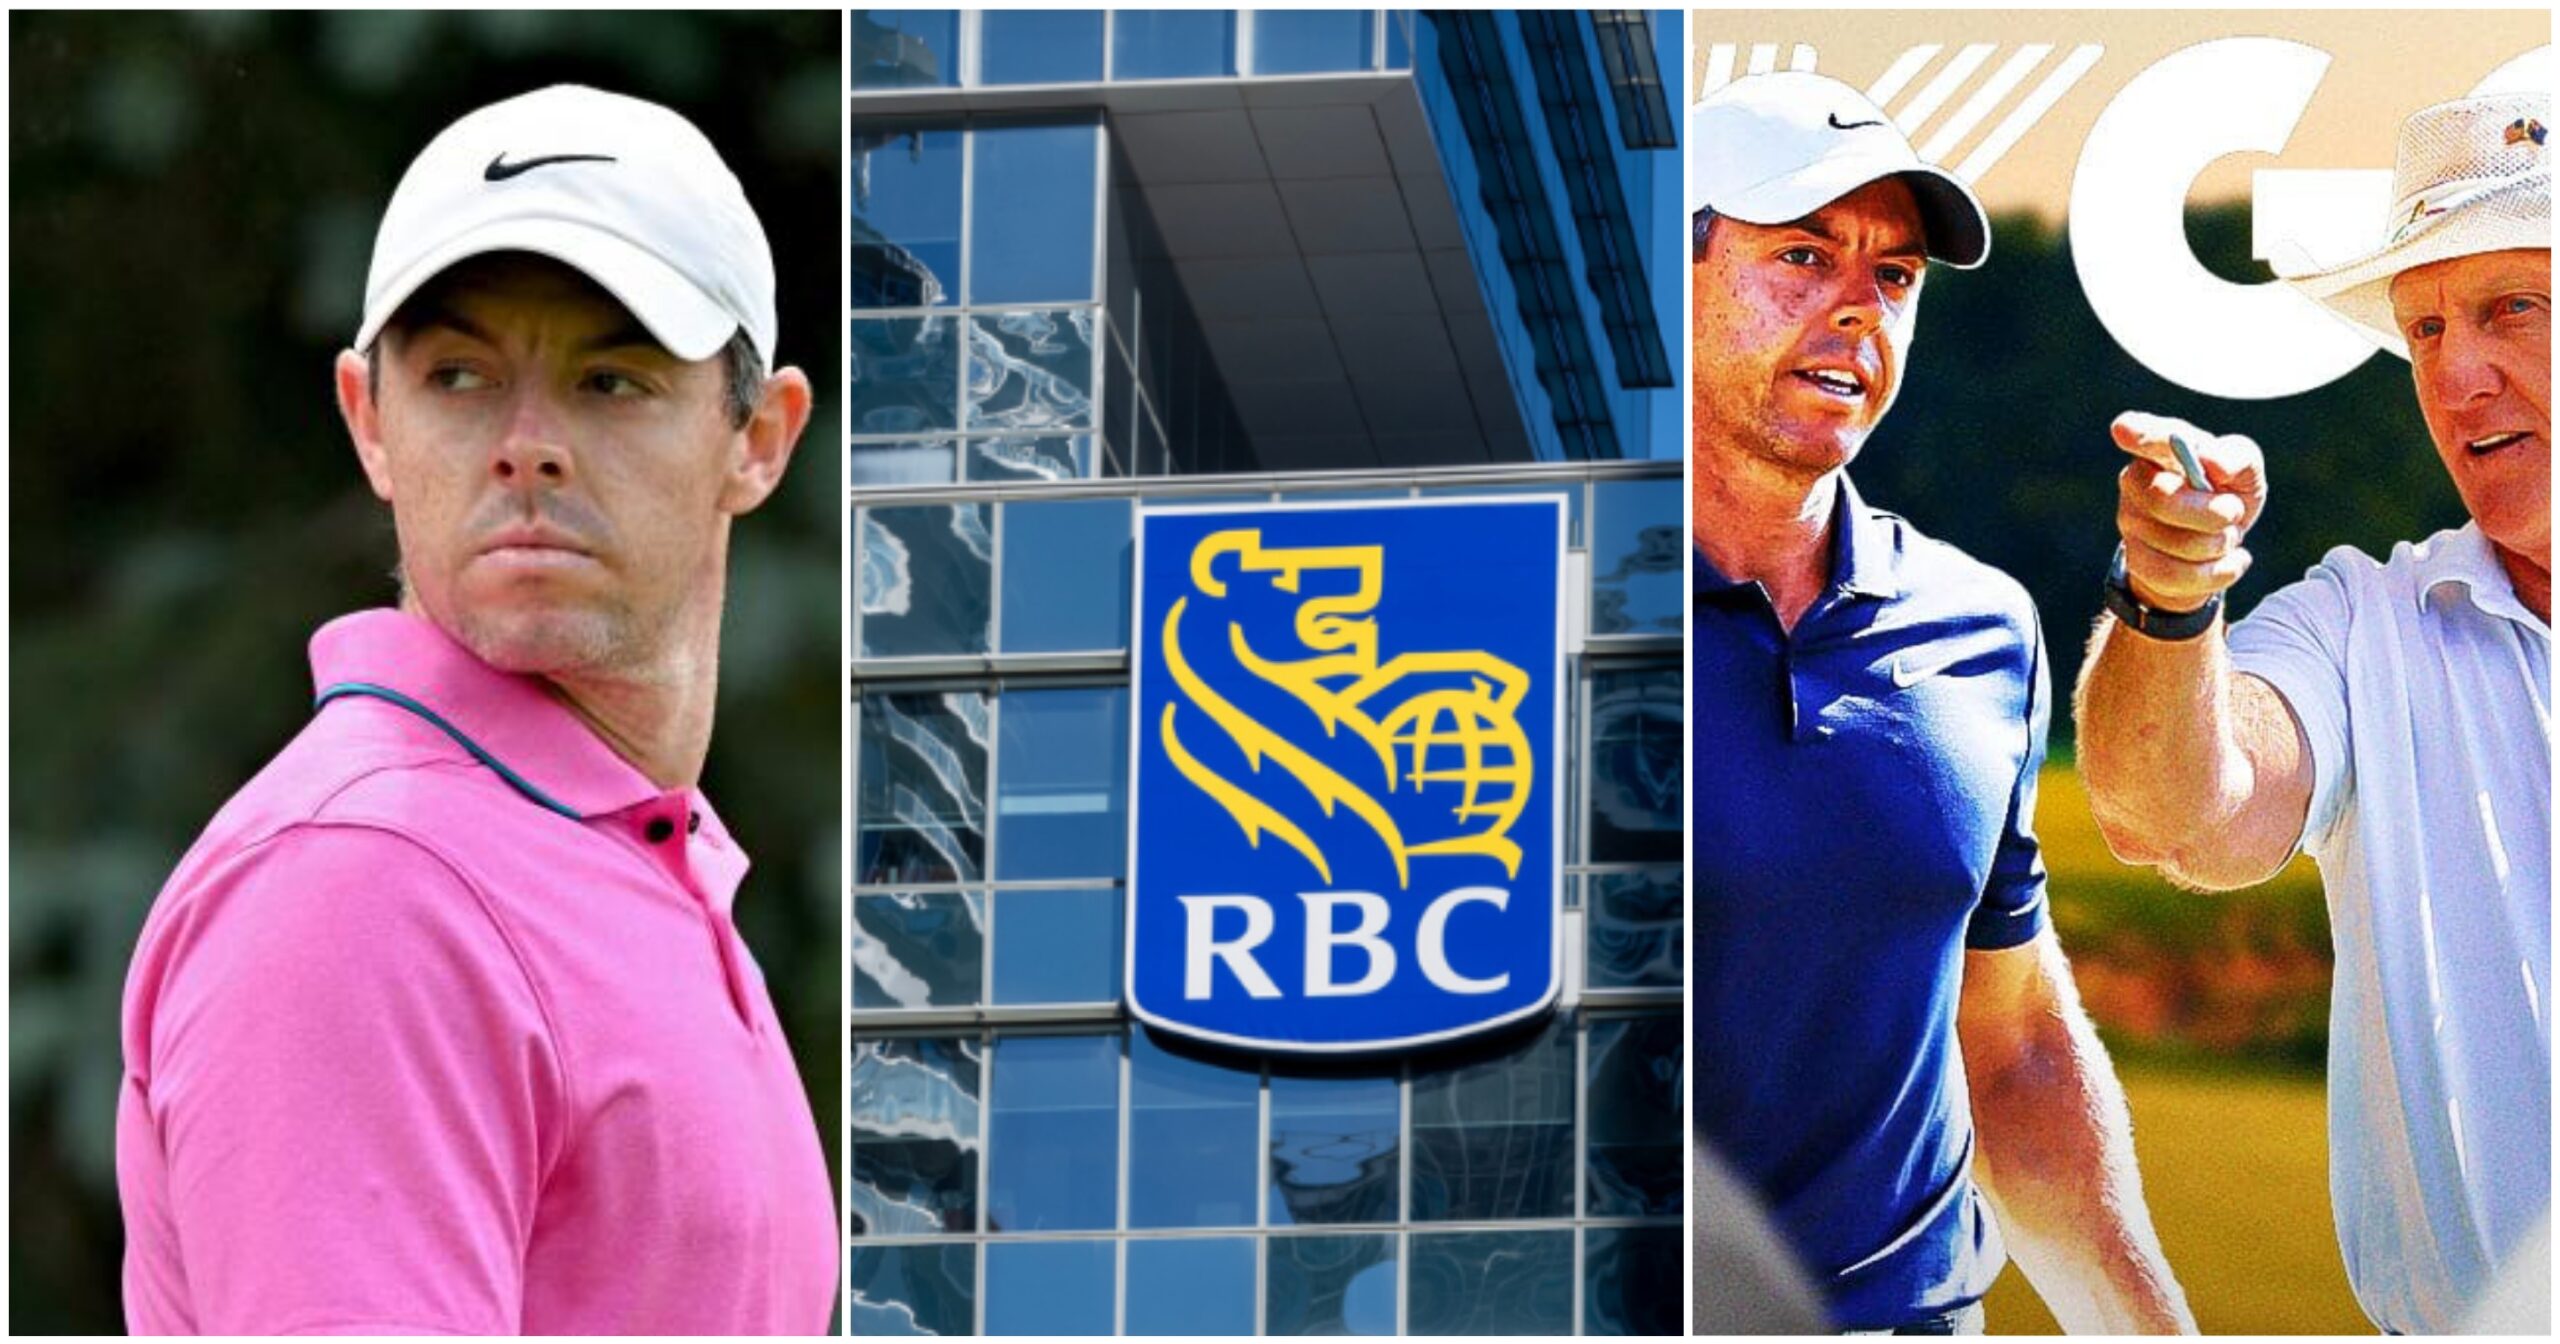 key sponsor, Royal Bank of Canada (RBC), has urged the PGA Tour to resolve its ongoing crisis with LIV Golf